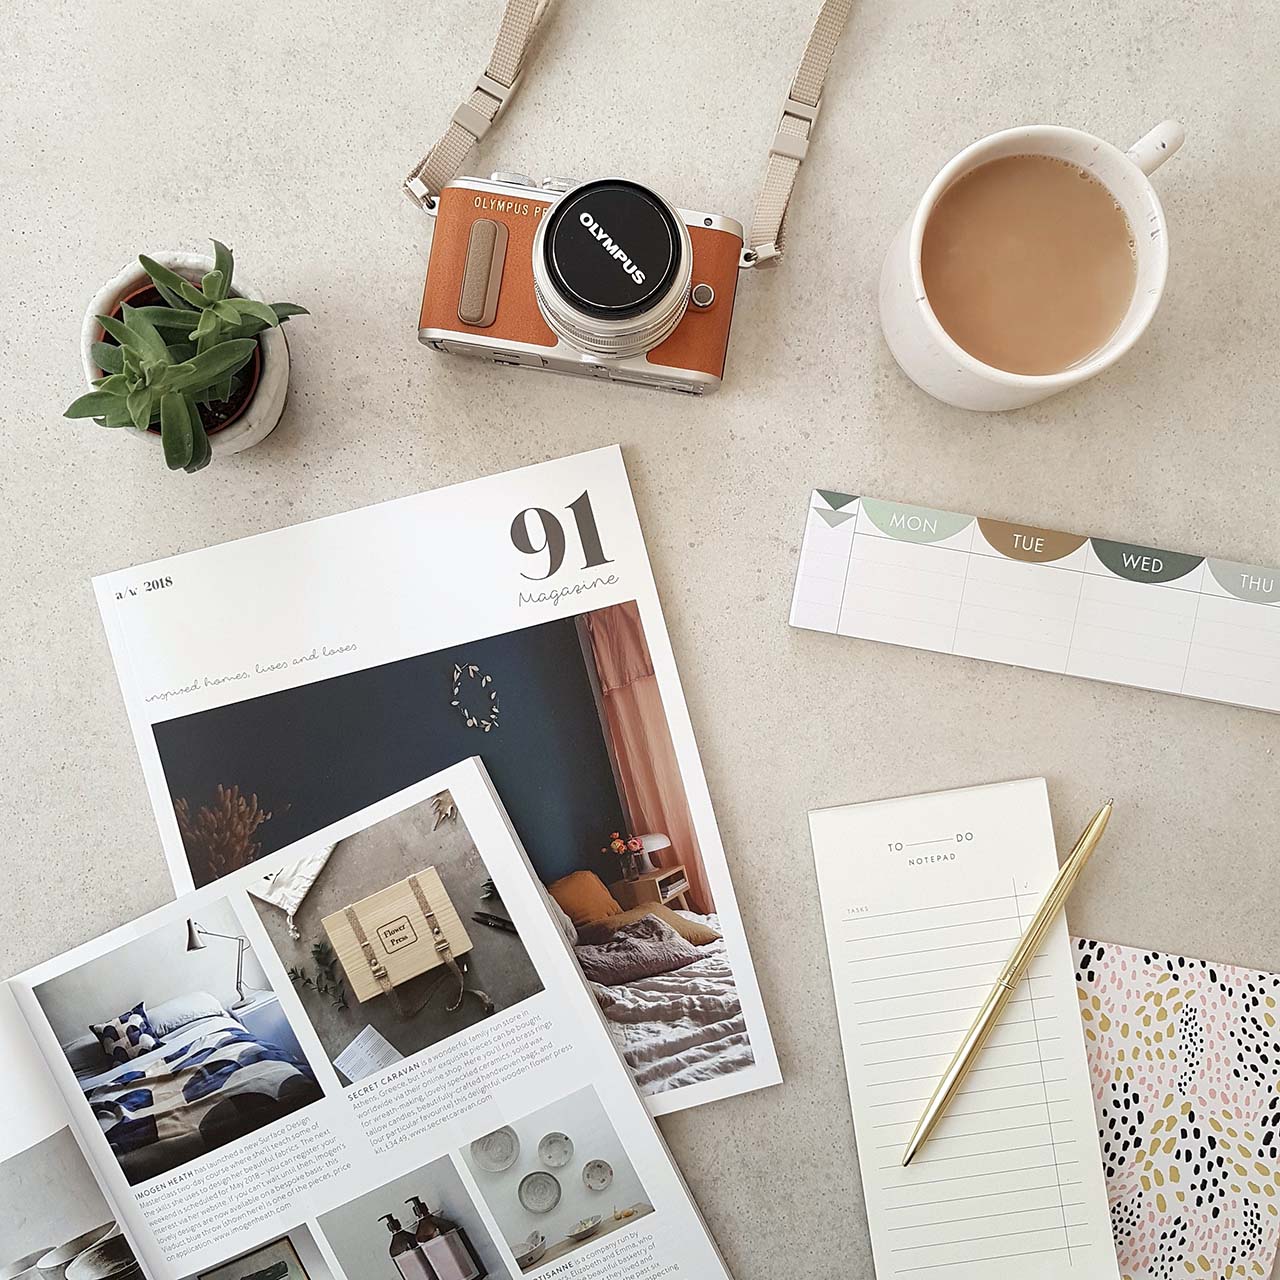 a copy of 91 magazine seen from above surrounded by a cup of coffee, a plant, a camera, a notebook and pen - inspiration for slow and seasonal living